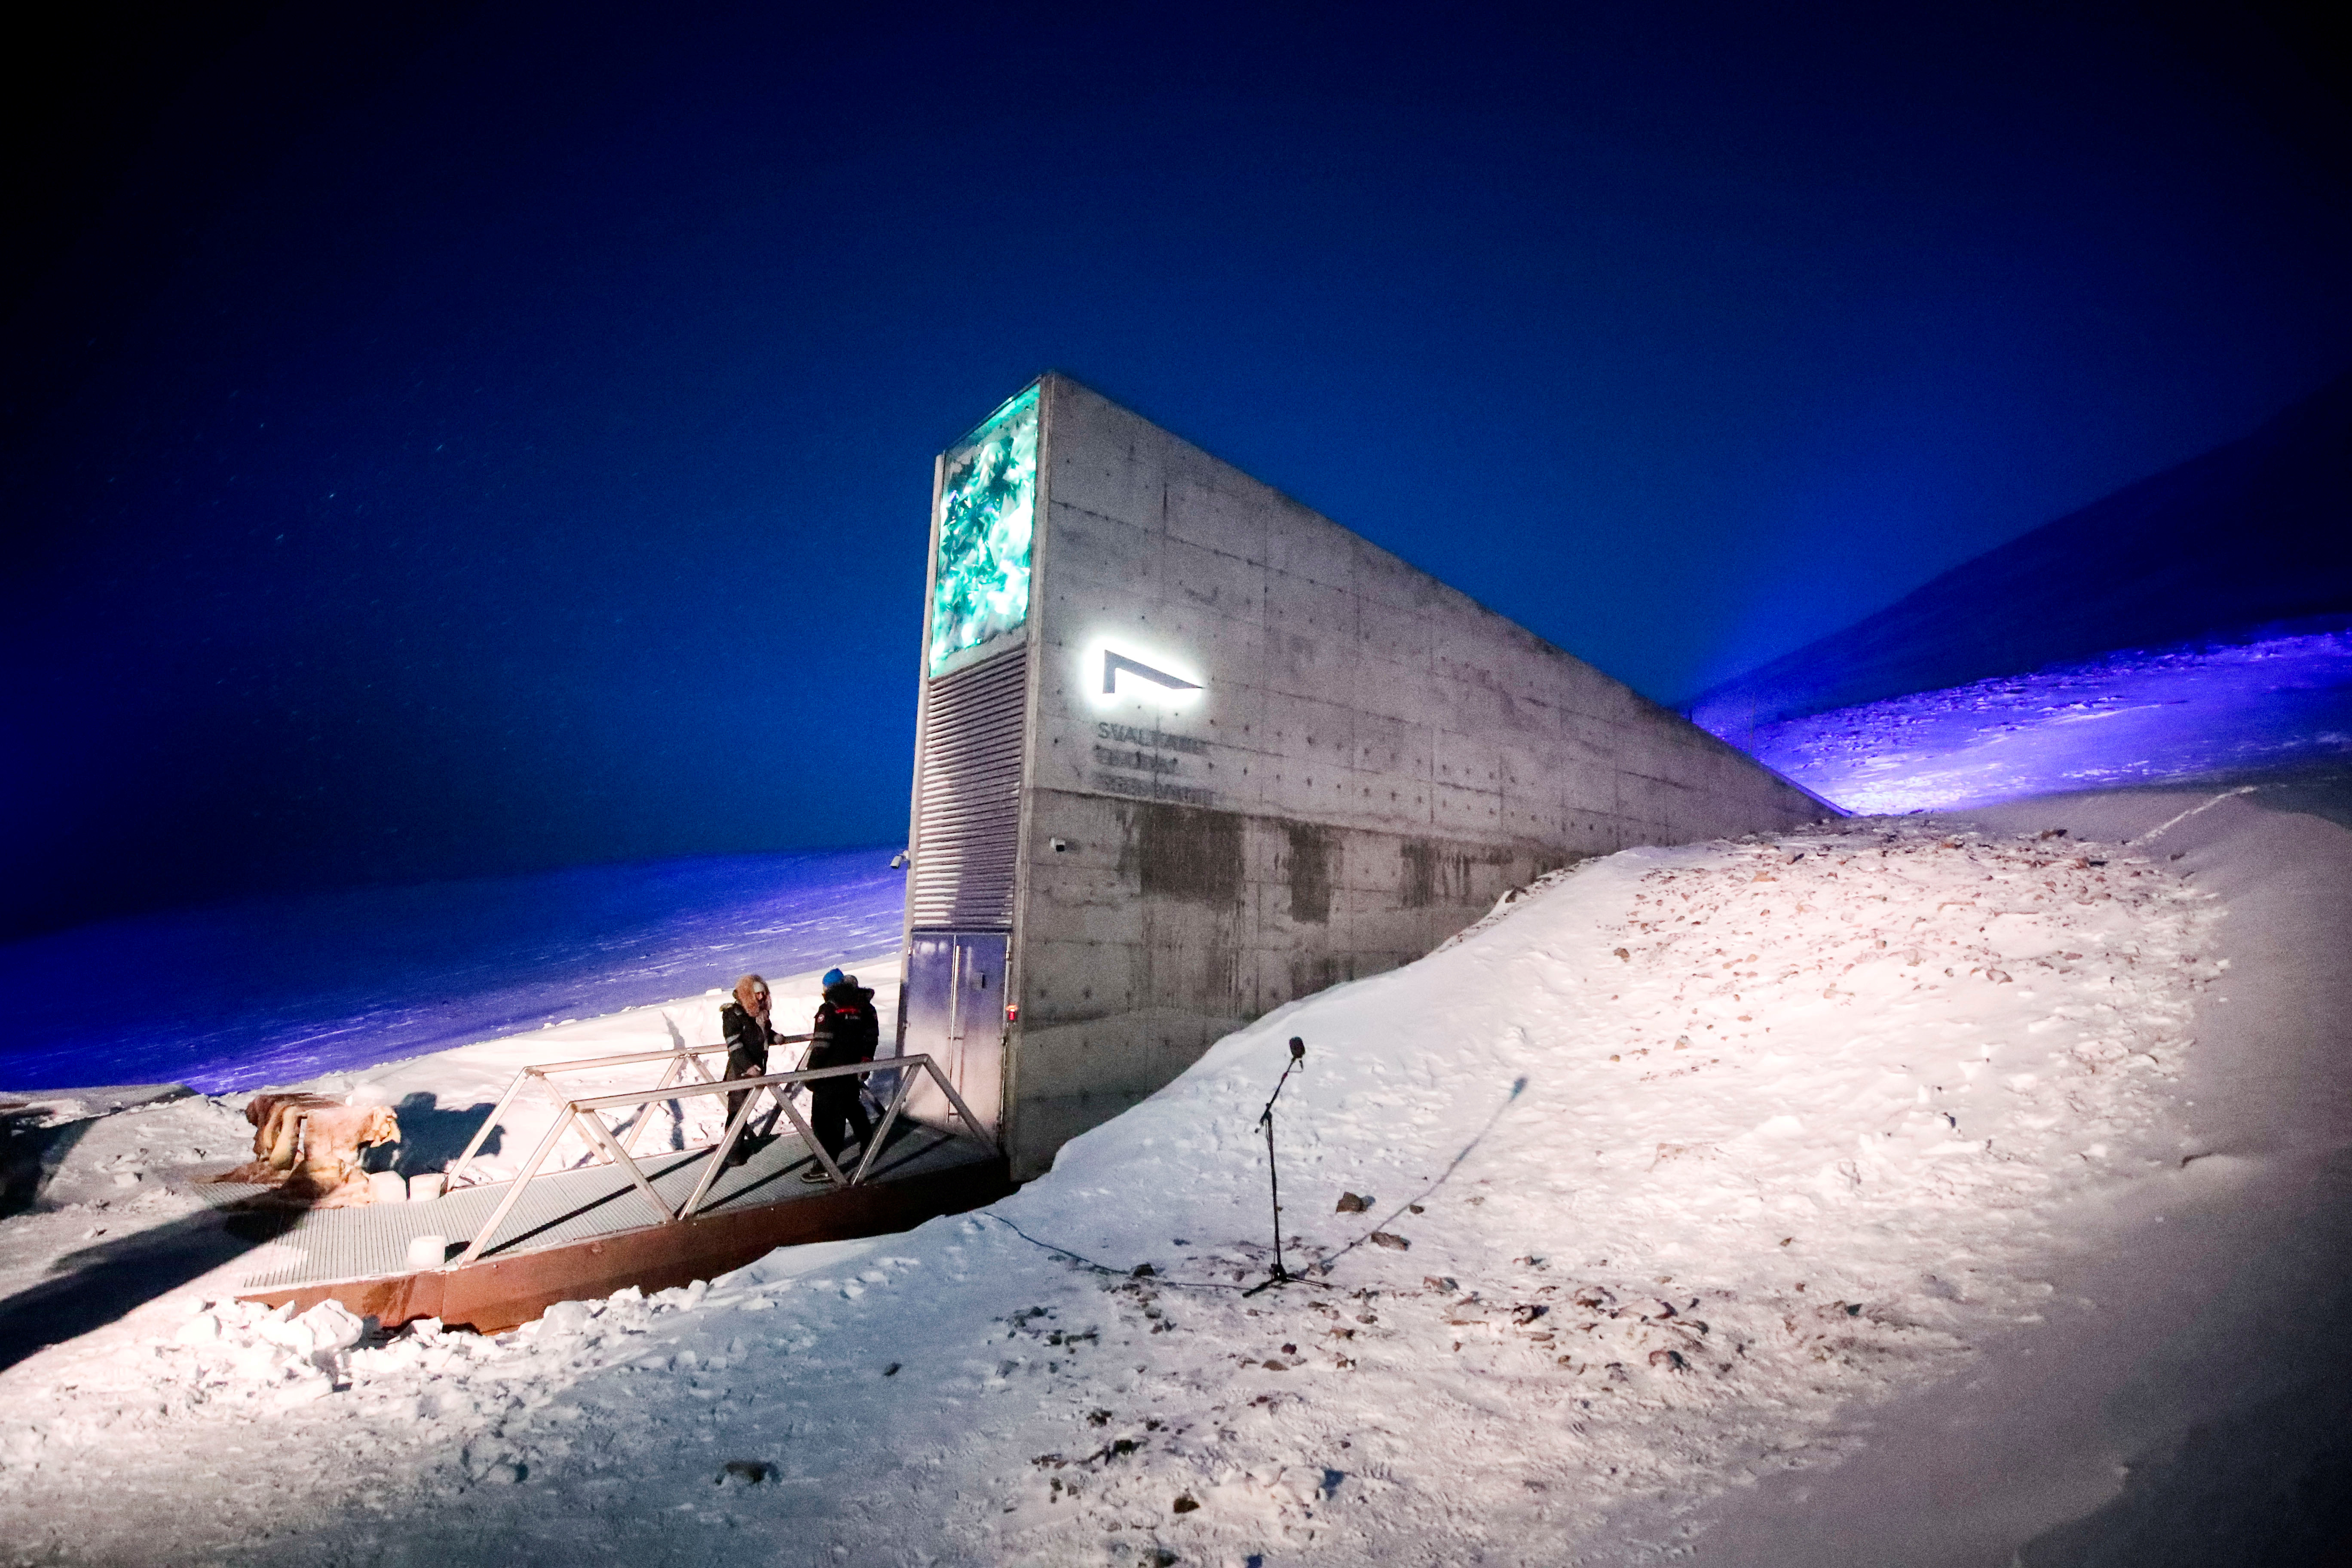 Representatives from many countries and universities arrive in the Svalbard's global seed vault with new seeds, in Longyearbyen